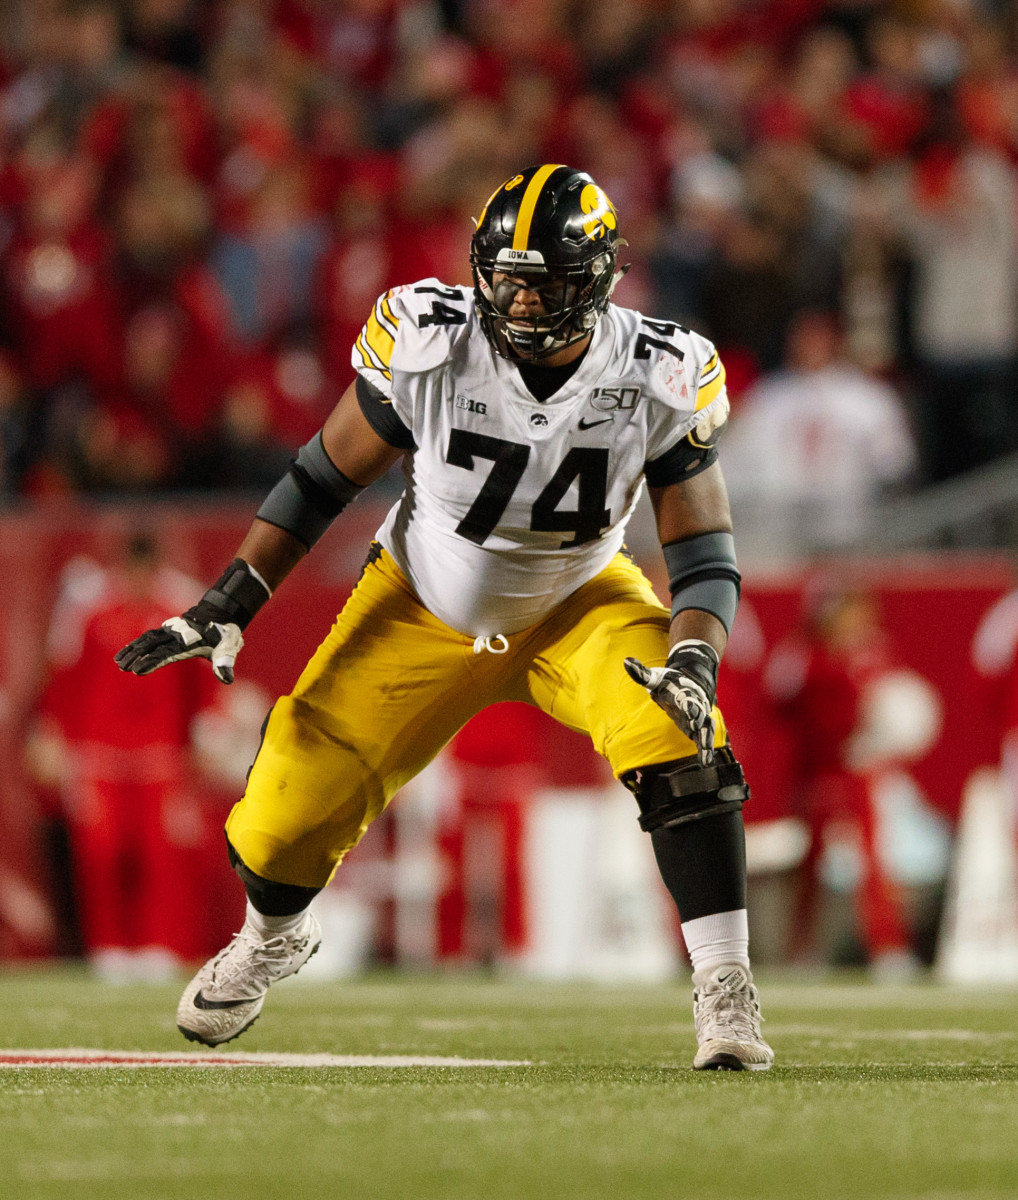 Nov 9, 2019; Madison, WI, USA; Iowa Hawkeyes offensive lineman Tristan Wirfs (74) during the game against the Wisconsin Badgers at Camp Randall Stadium. Mandatory Credit: Jeff Hanisch-USA TODAY Sports